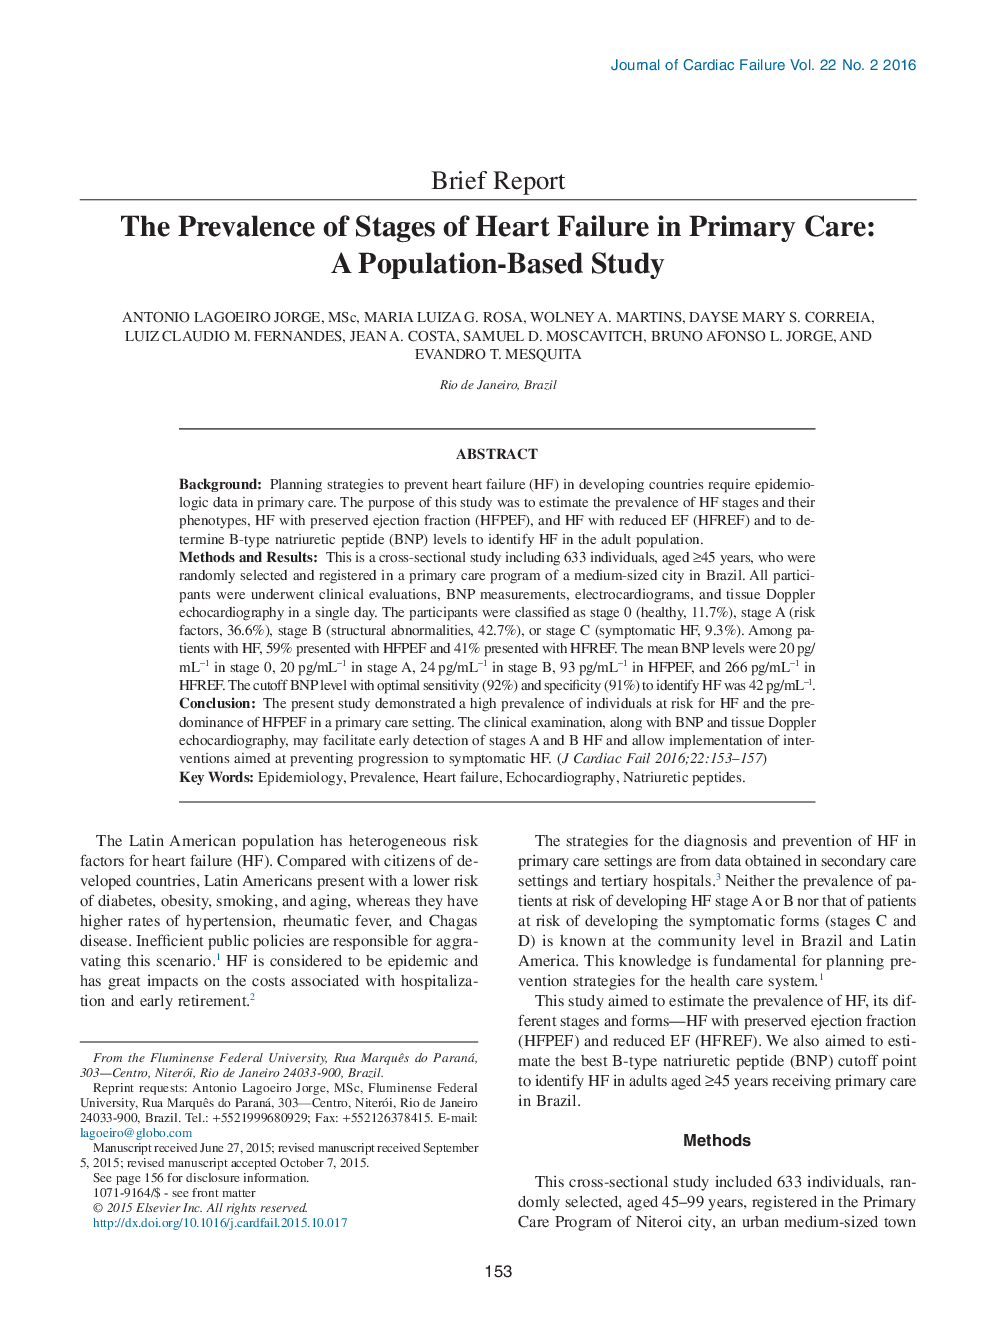 The Prevalence of Stages of Heart Failure in Primary Care: A Population-Based Study